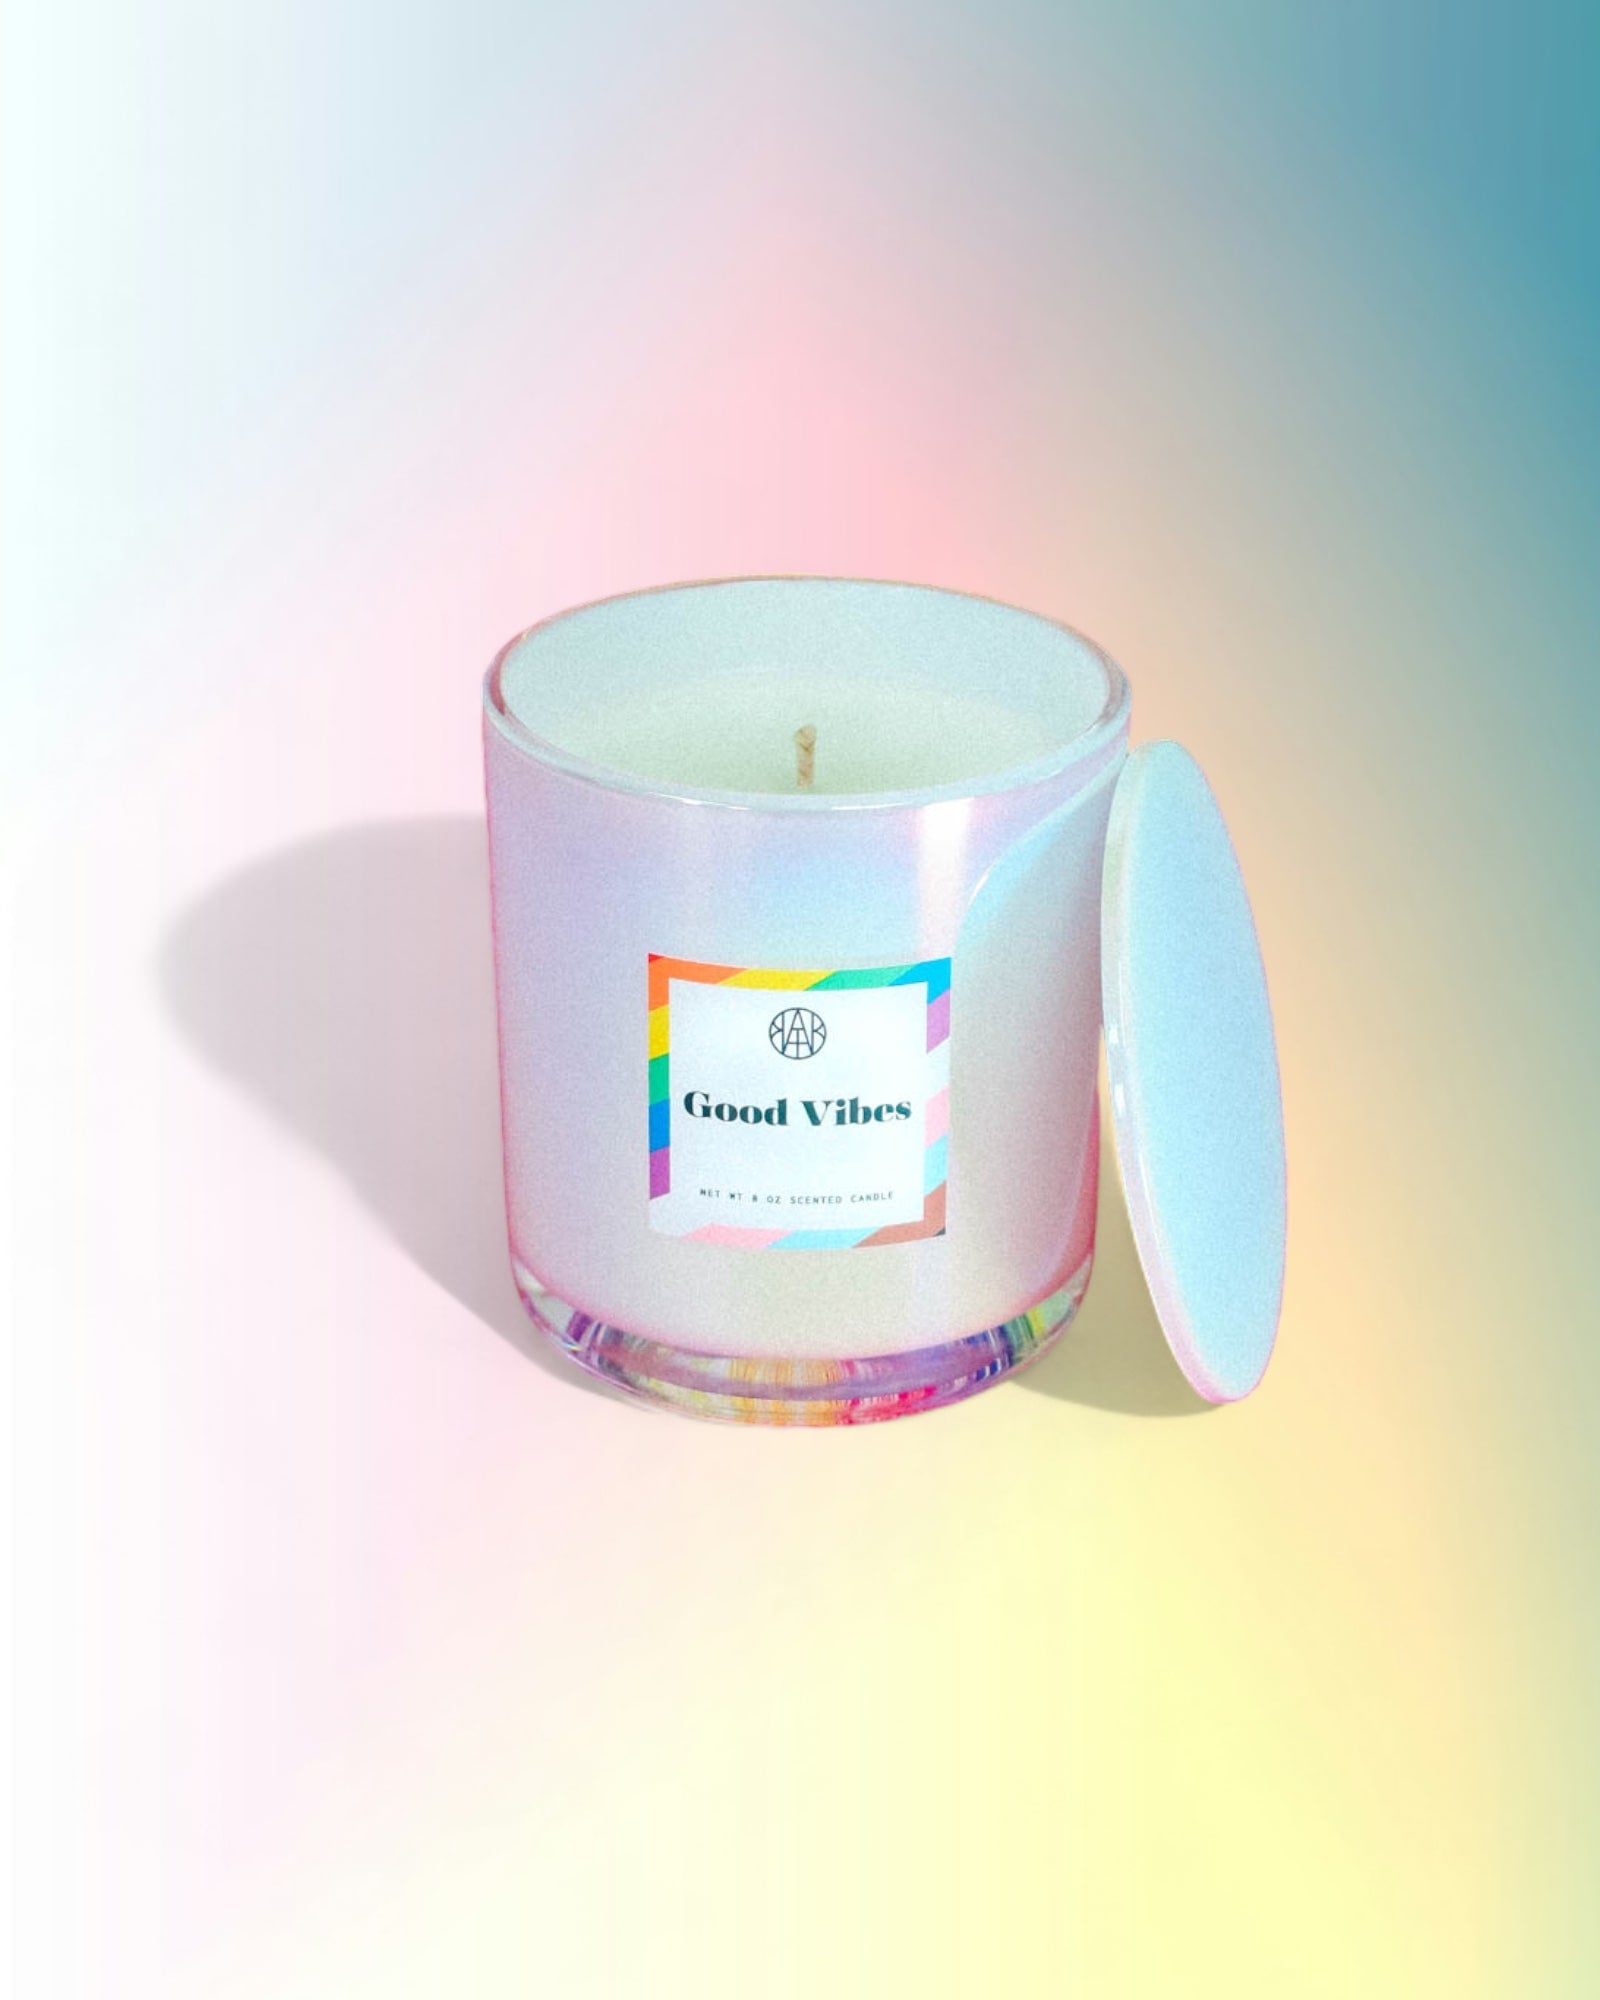 Good Vibes Luxury Charity Candle by AEMBR 